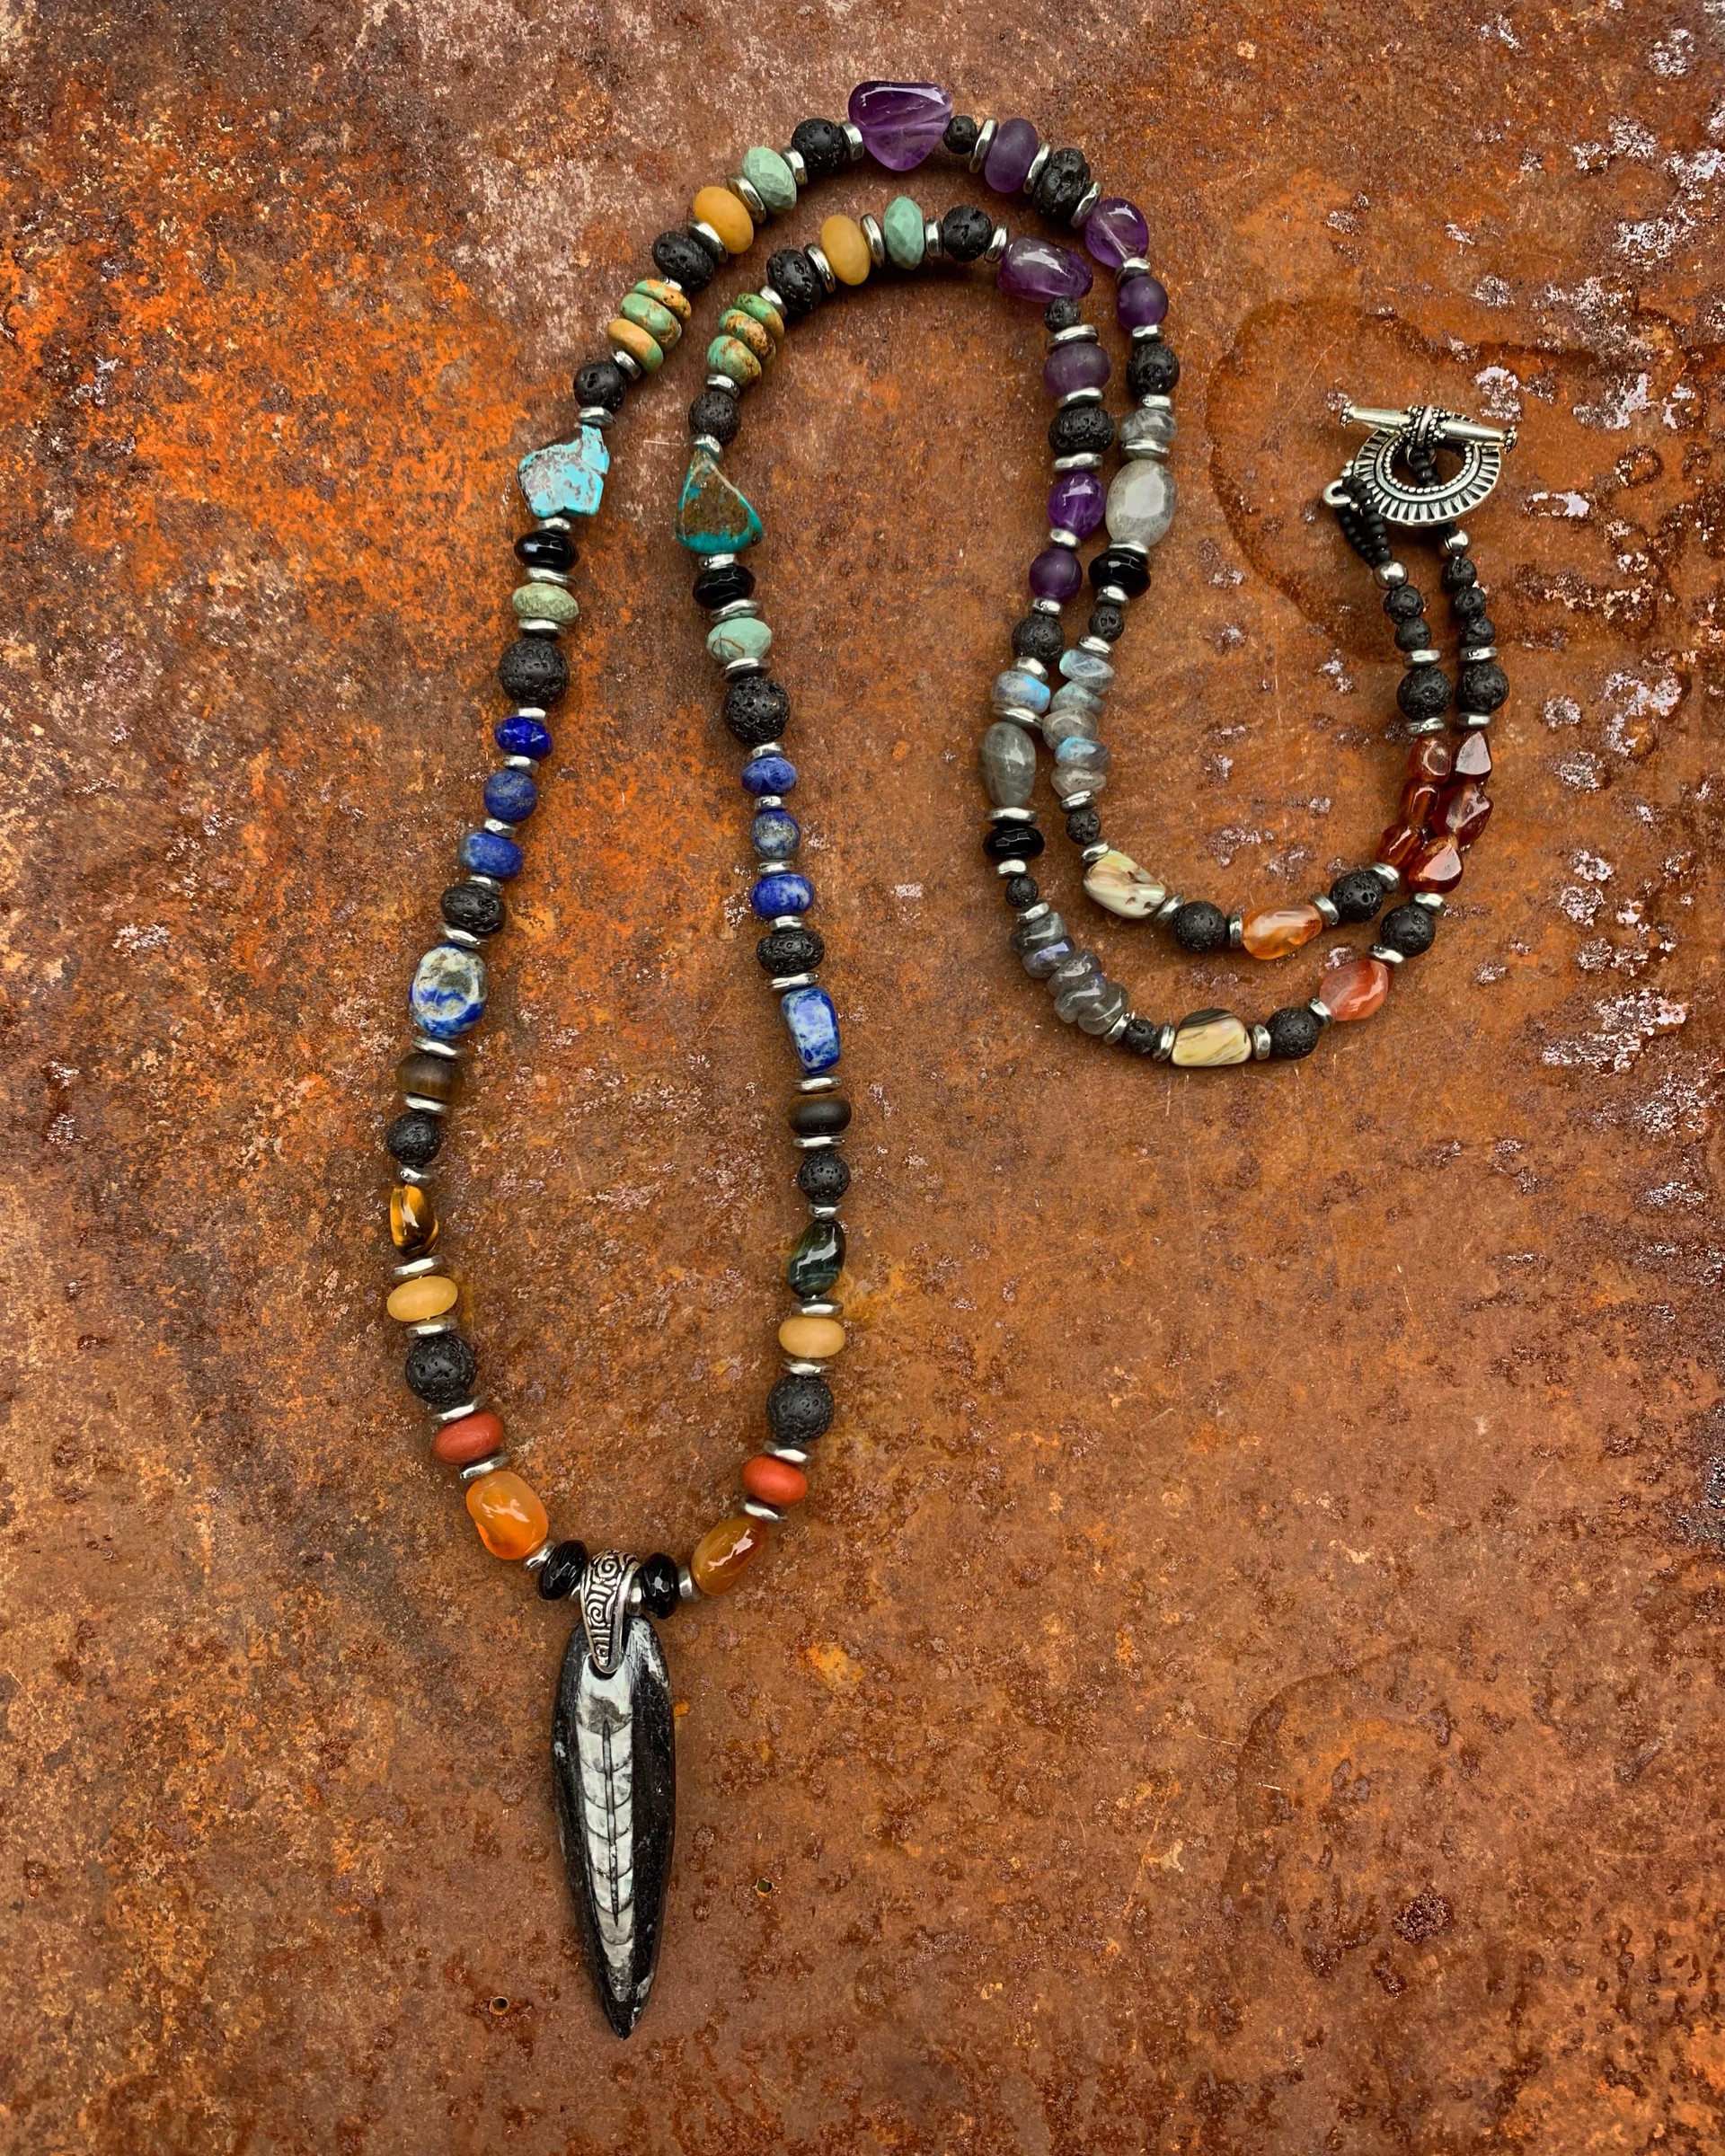 K496 Earth Rainbow Orthoceras Necklace by Kelly Ormsby